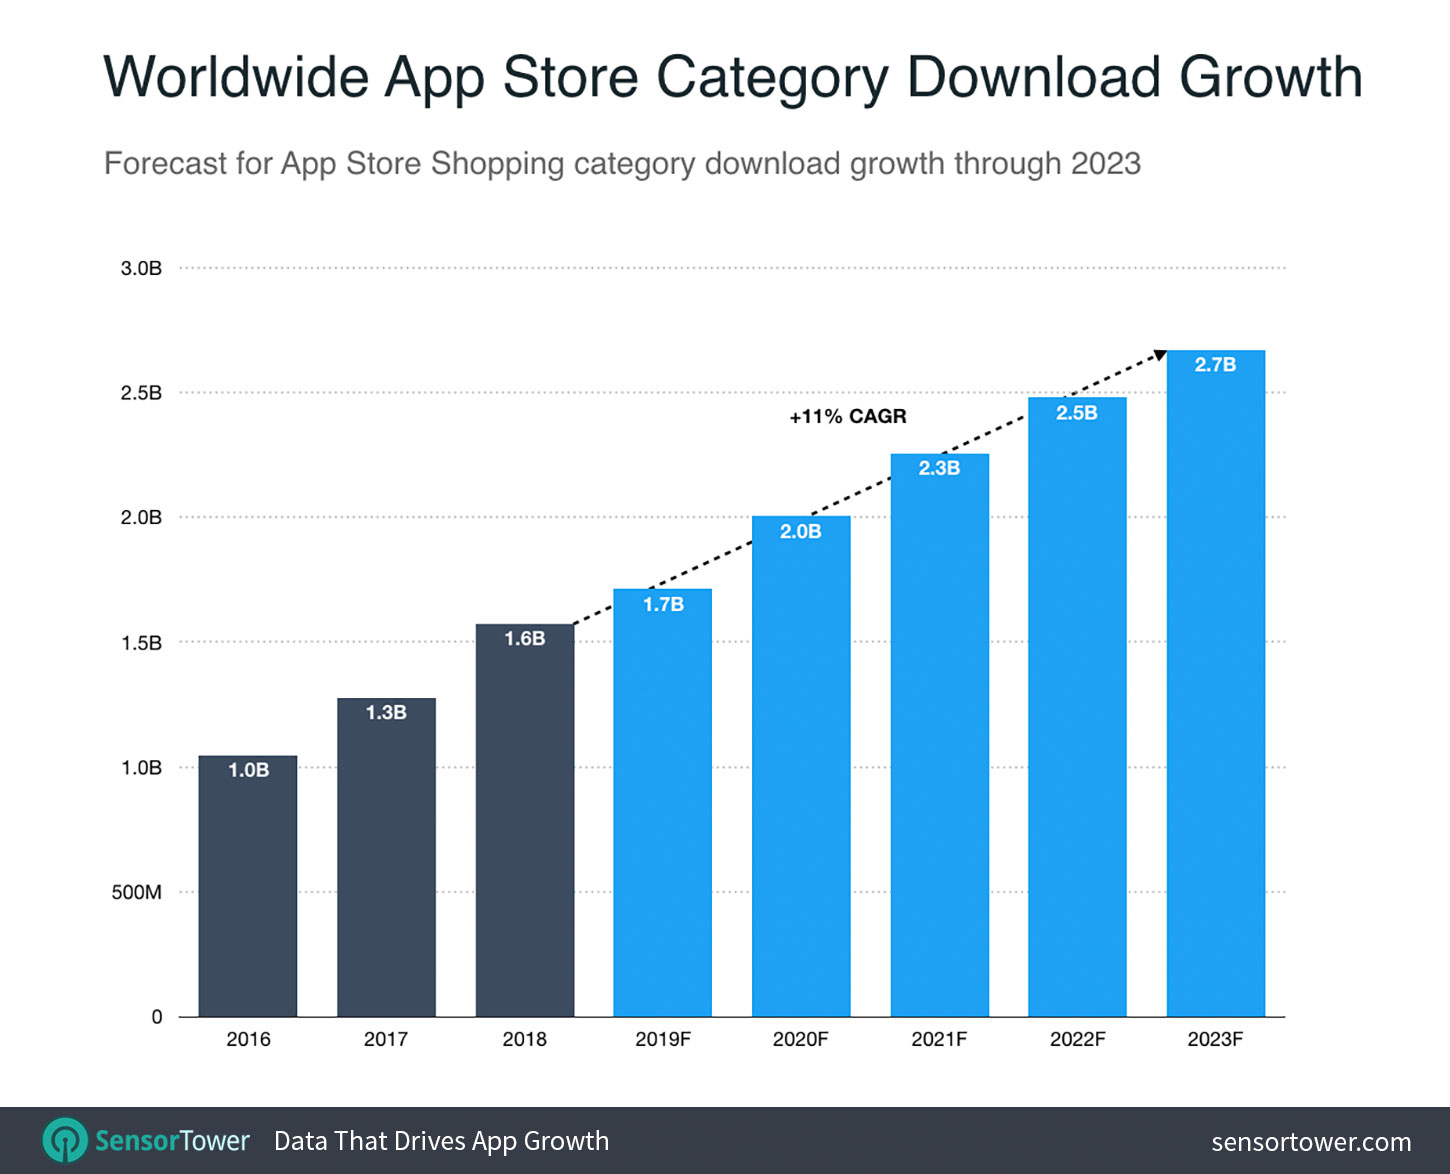 Shopping App Downloads Reached Record 1.1 Billion Globally in Q3 2019